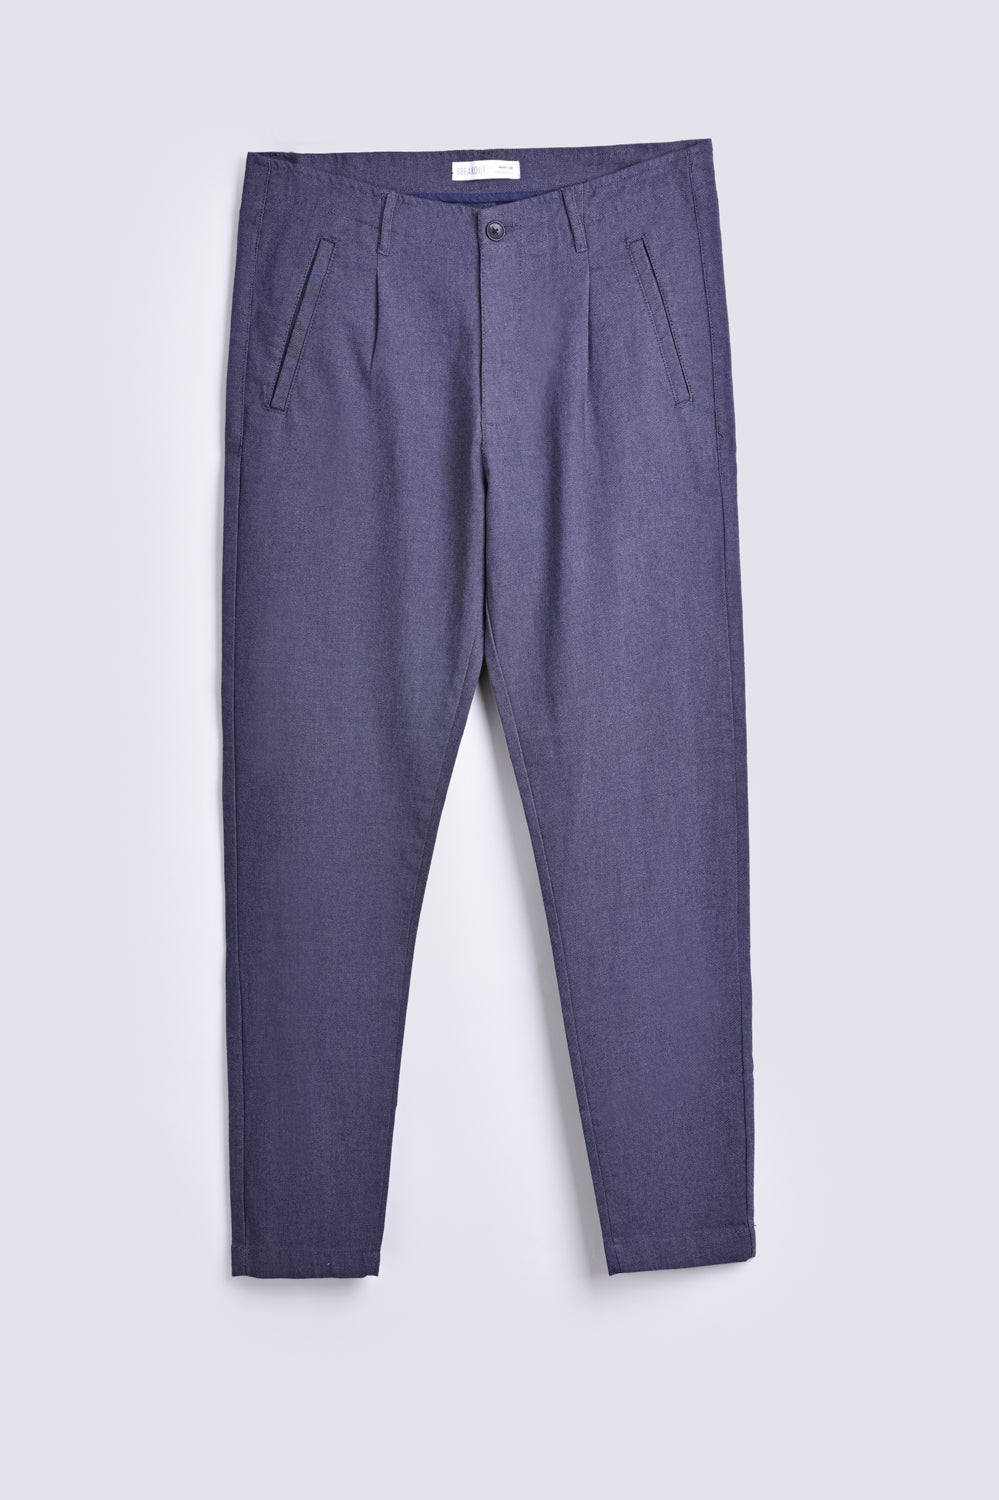 RELAXED FIT TROUSER